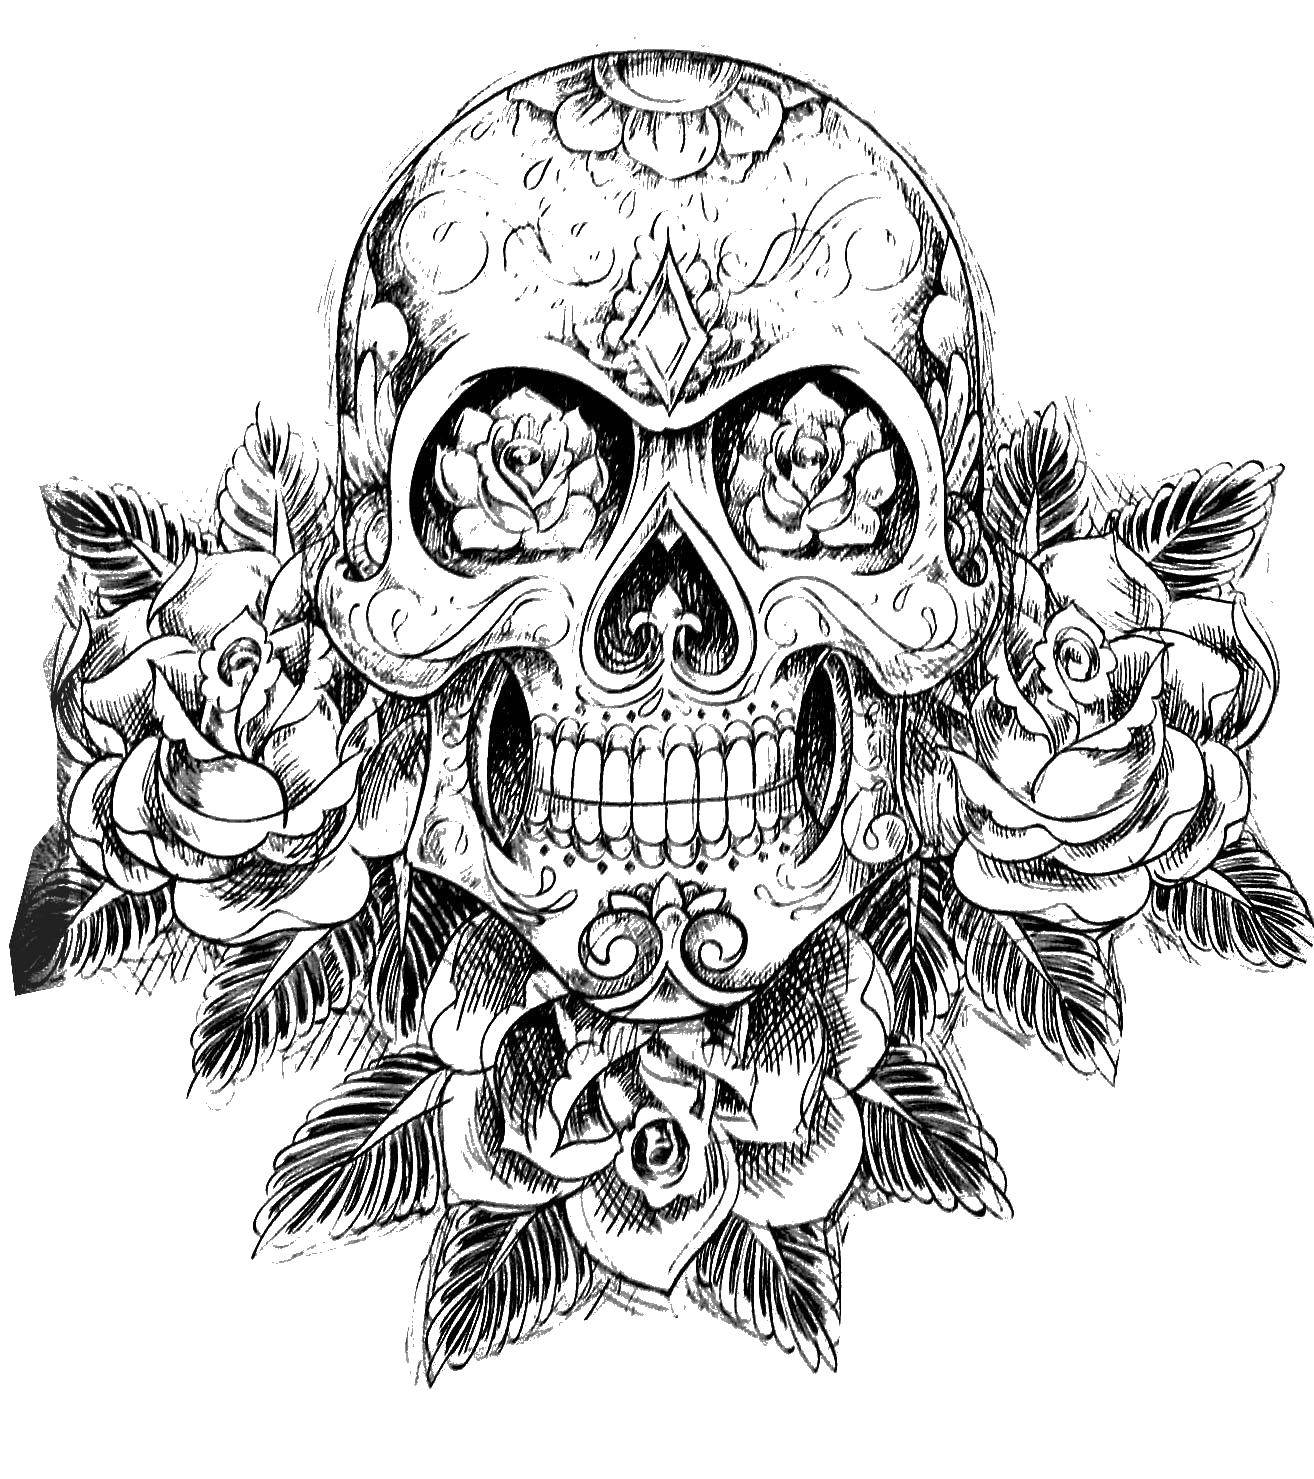 Coloring Skull and flowers. Category Skull. Tags:  skull, patterns, flowers.